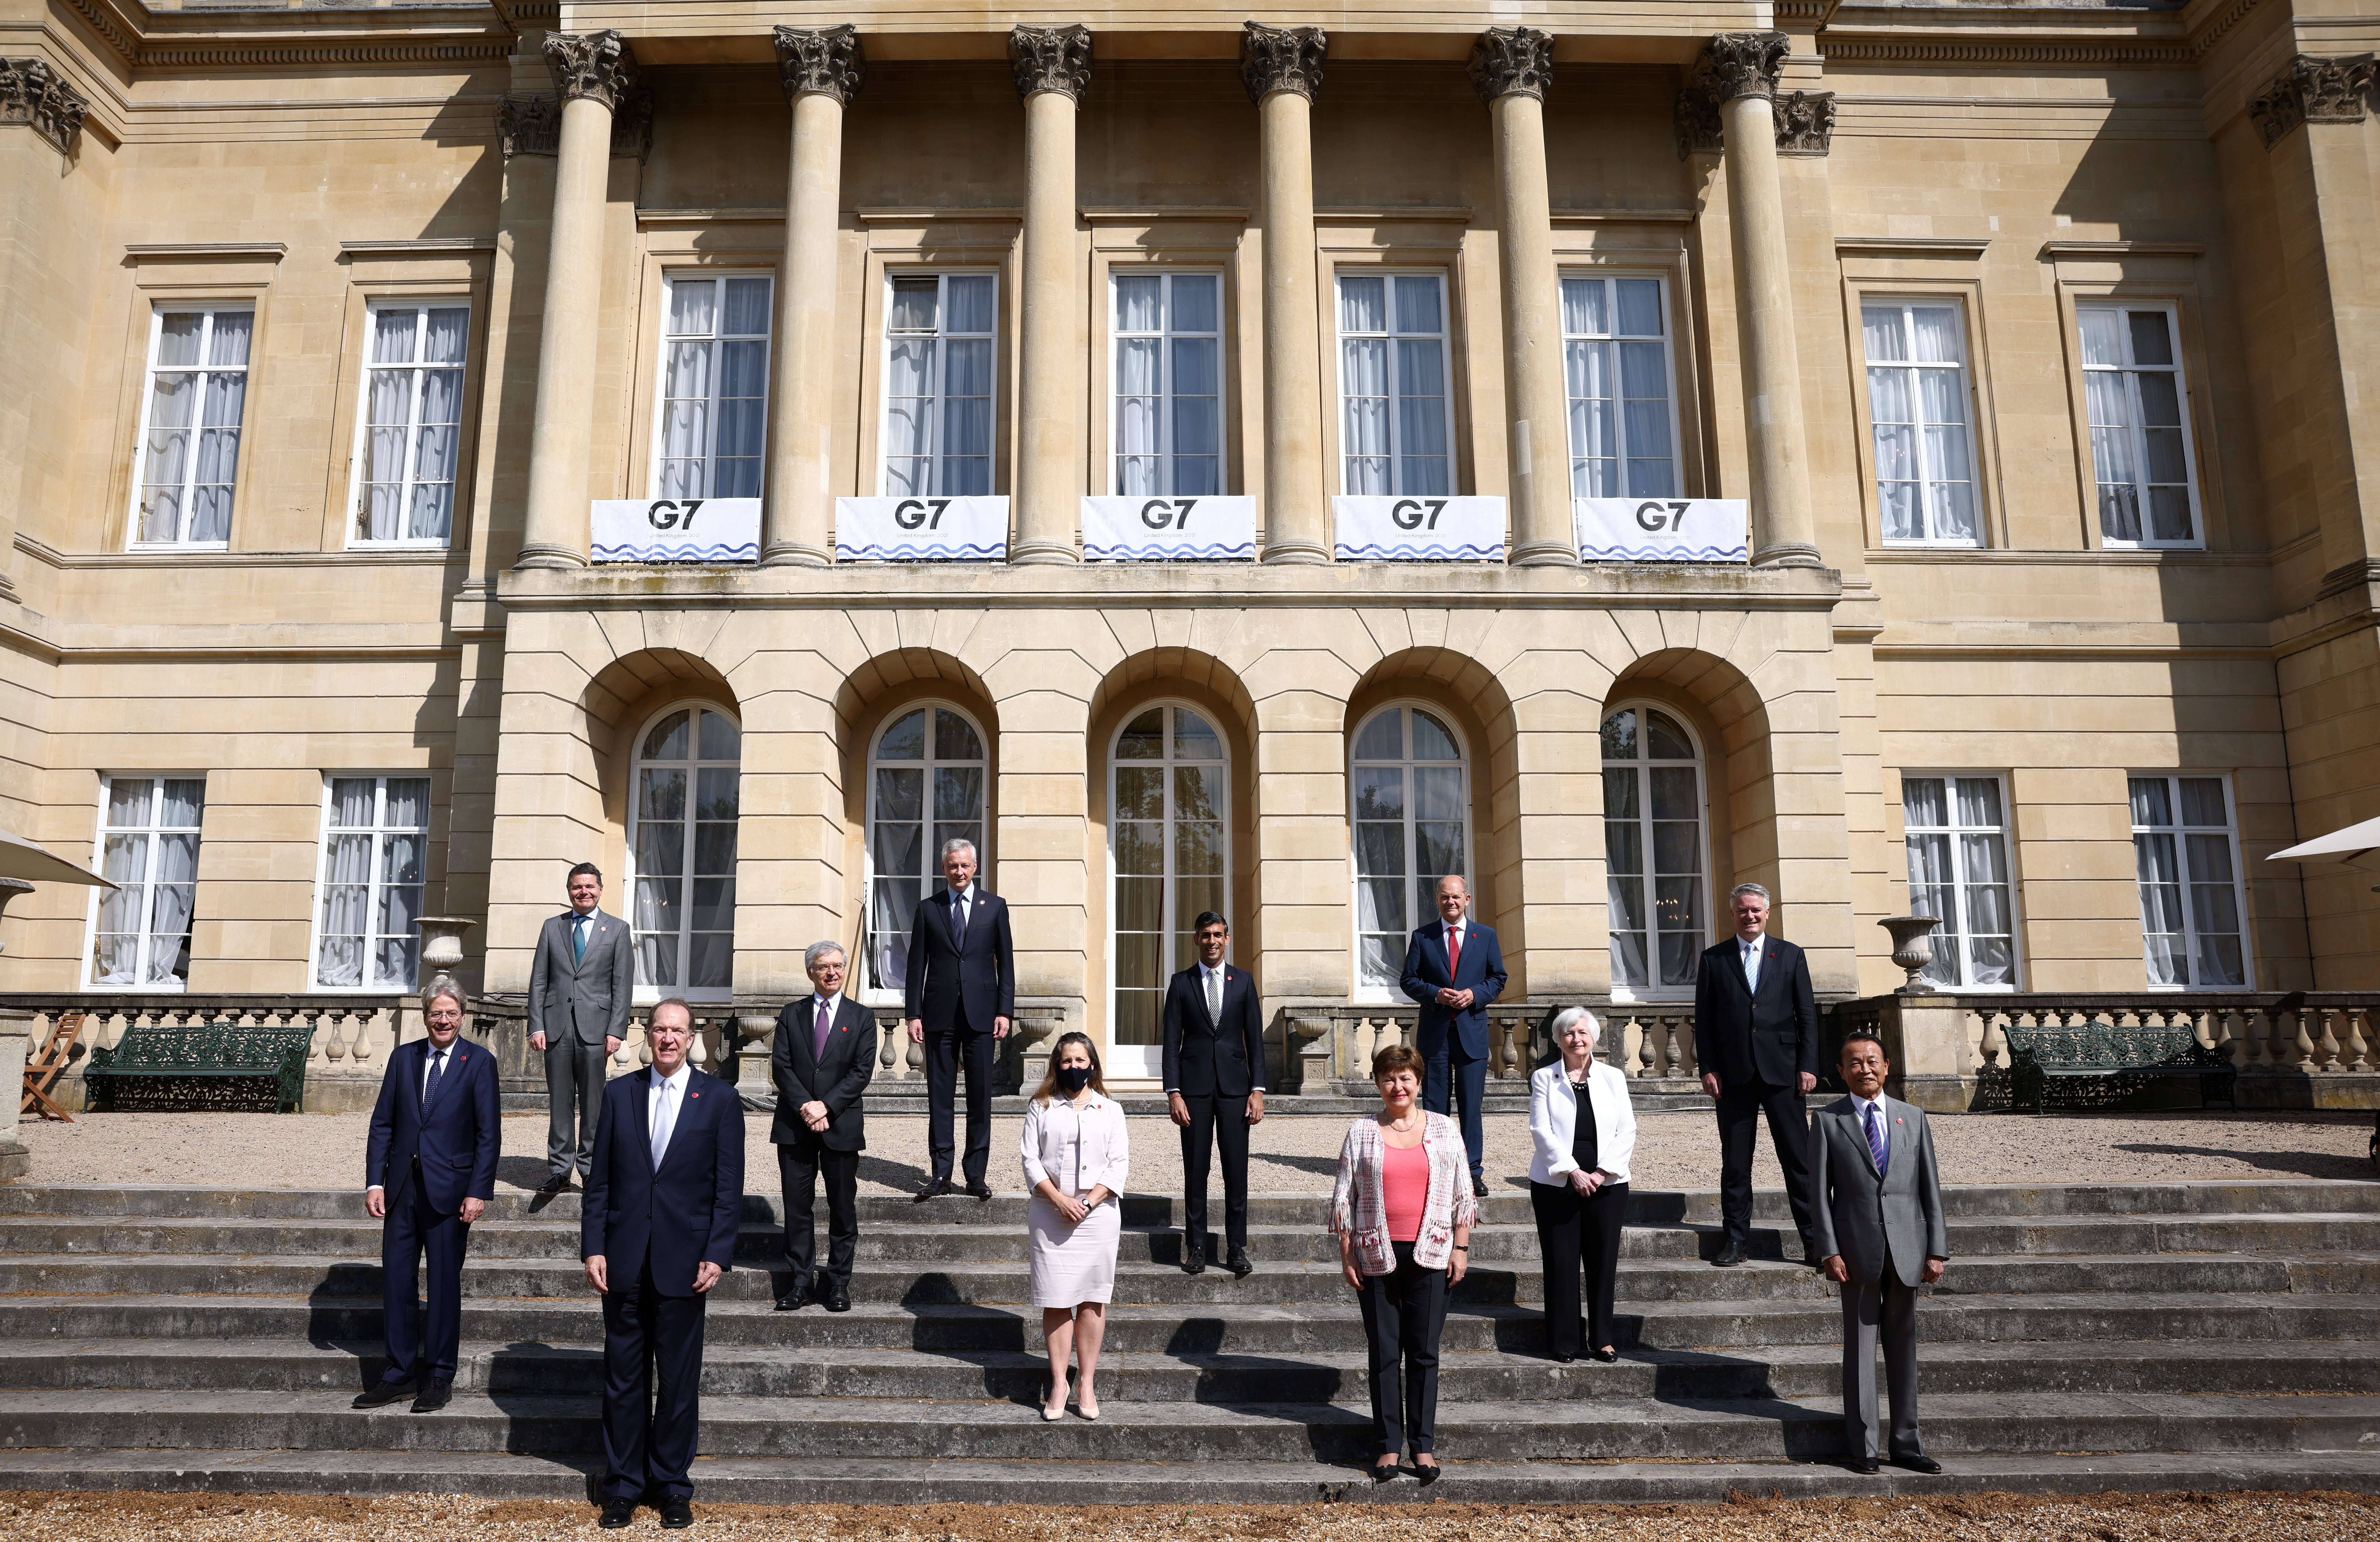 G7 finance ministers meeting